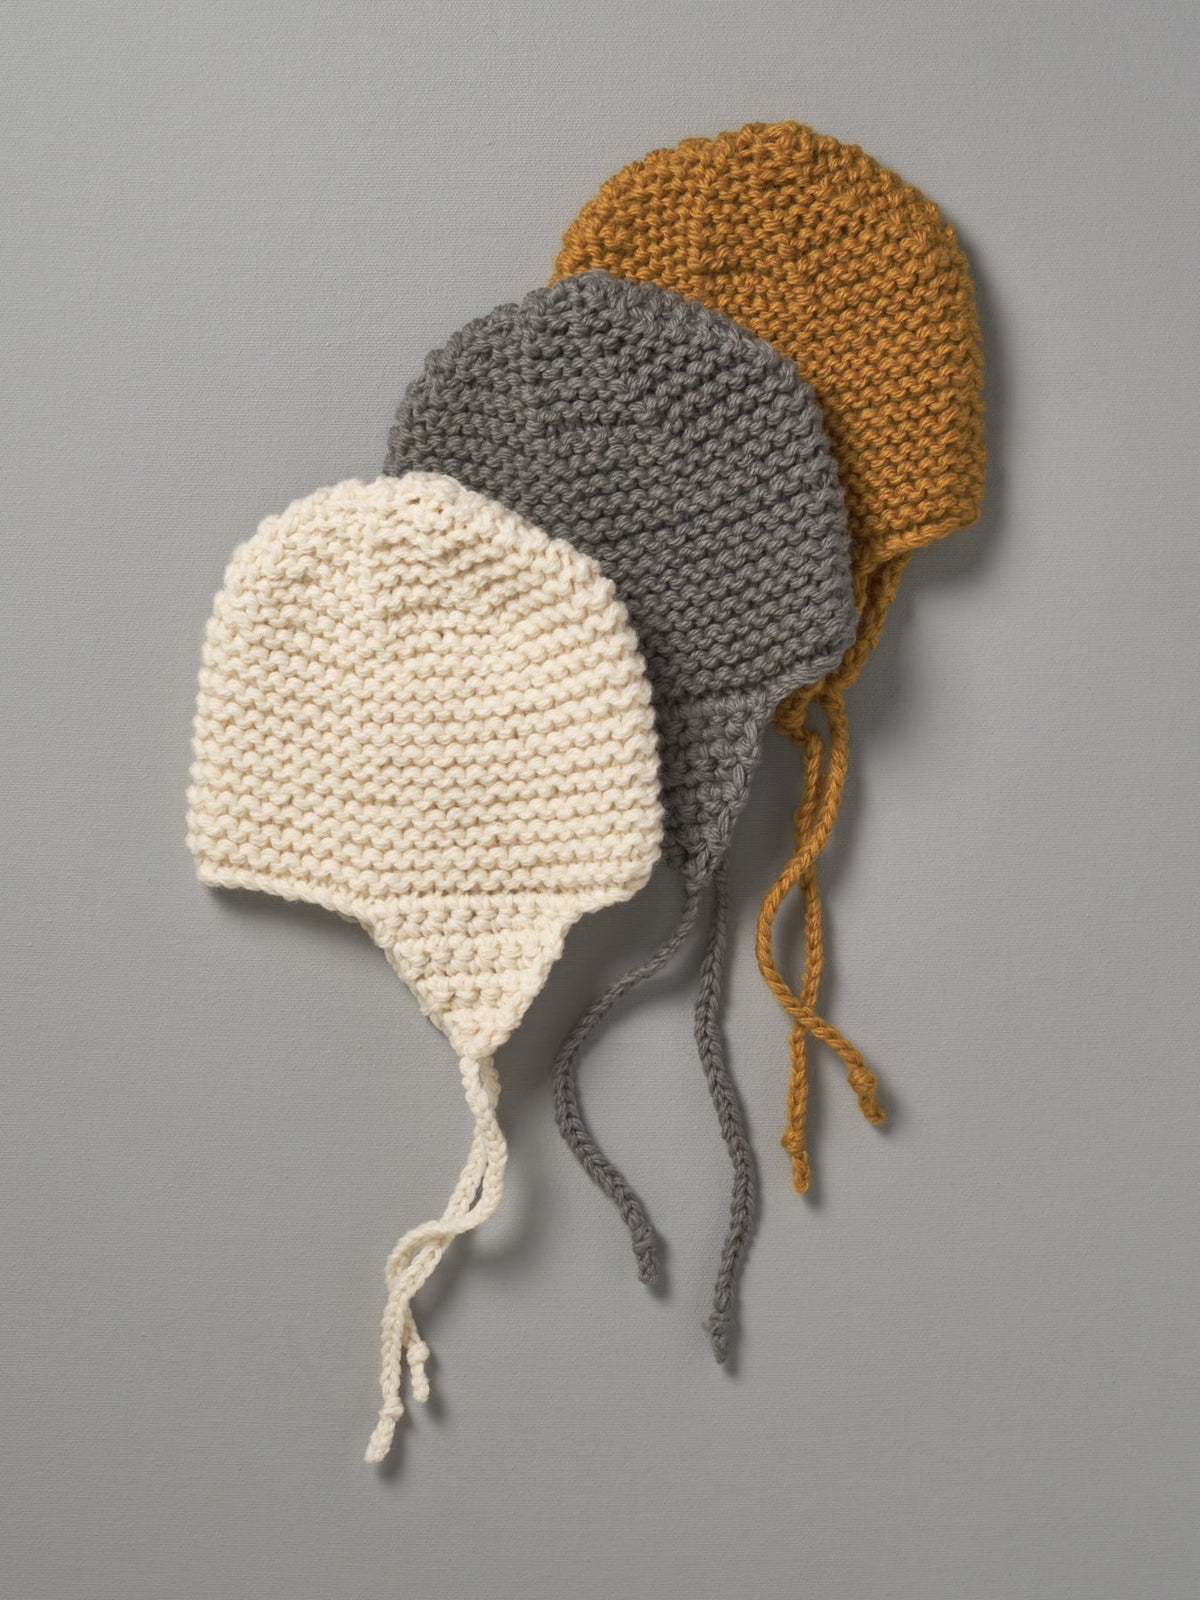 Three Weebits Hand Knitted Chunky Knit Hats on a grey background.